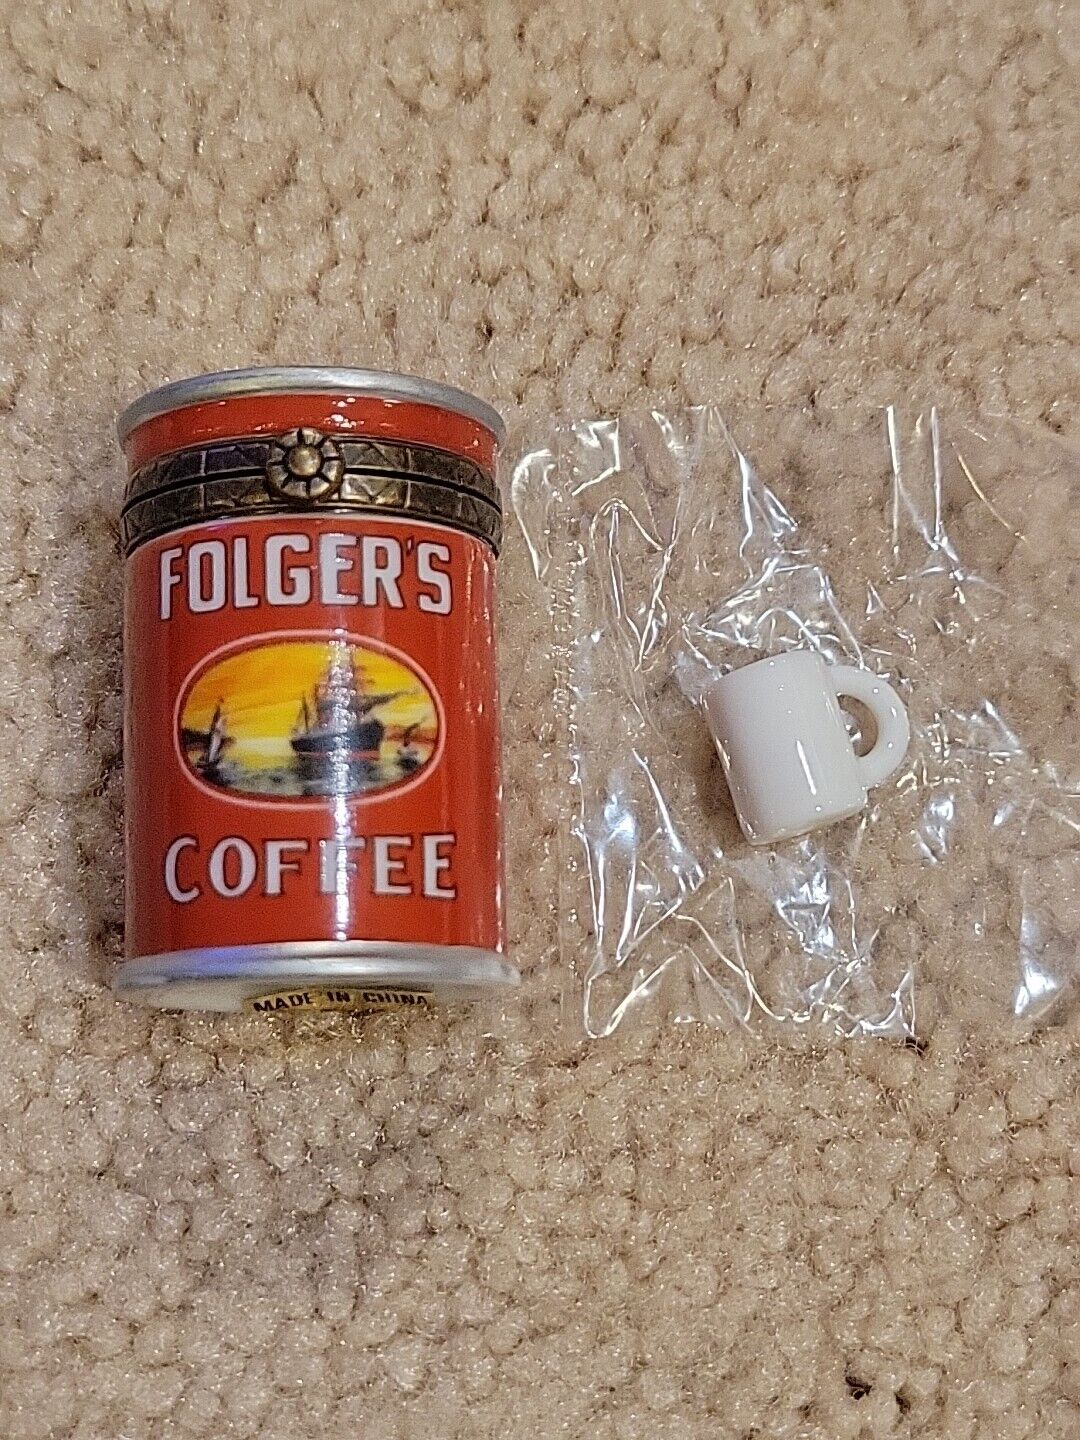 PHB Porcelain Hinged Trinket Box Midwest Cannon Falls Folgers Coffee